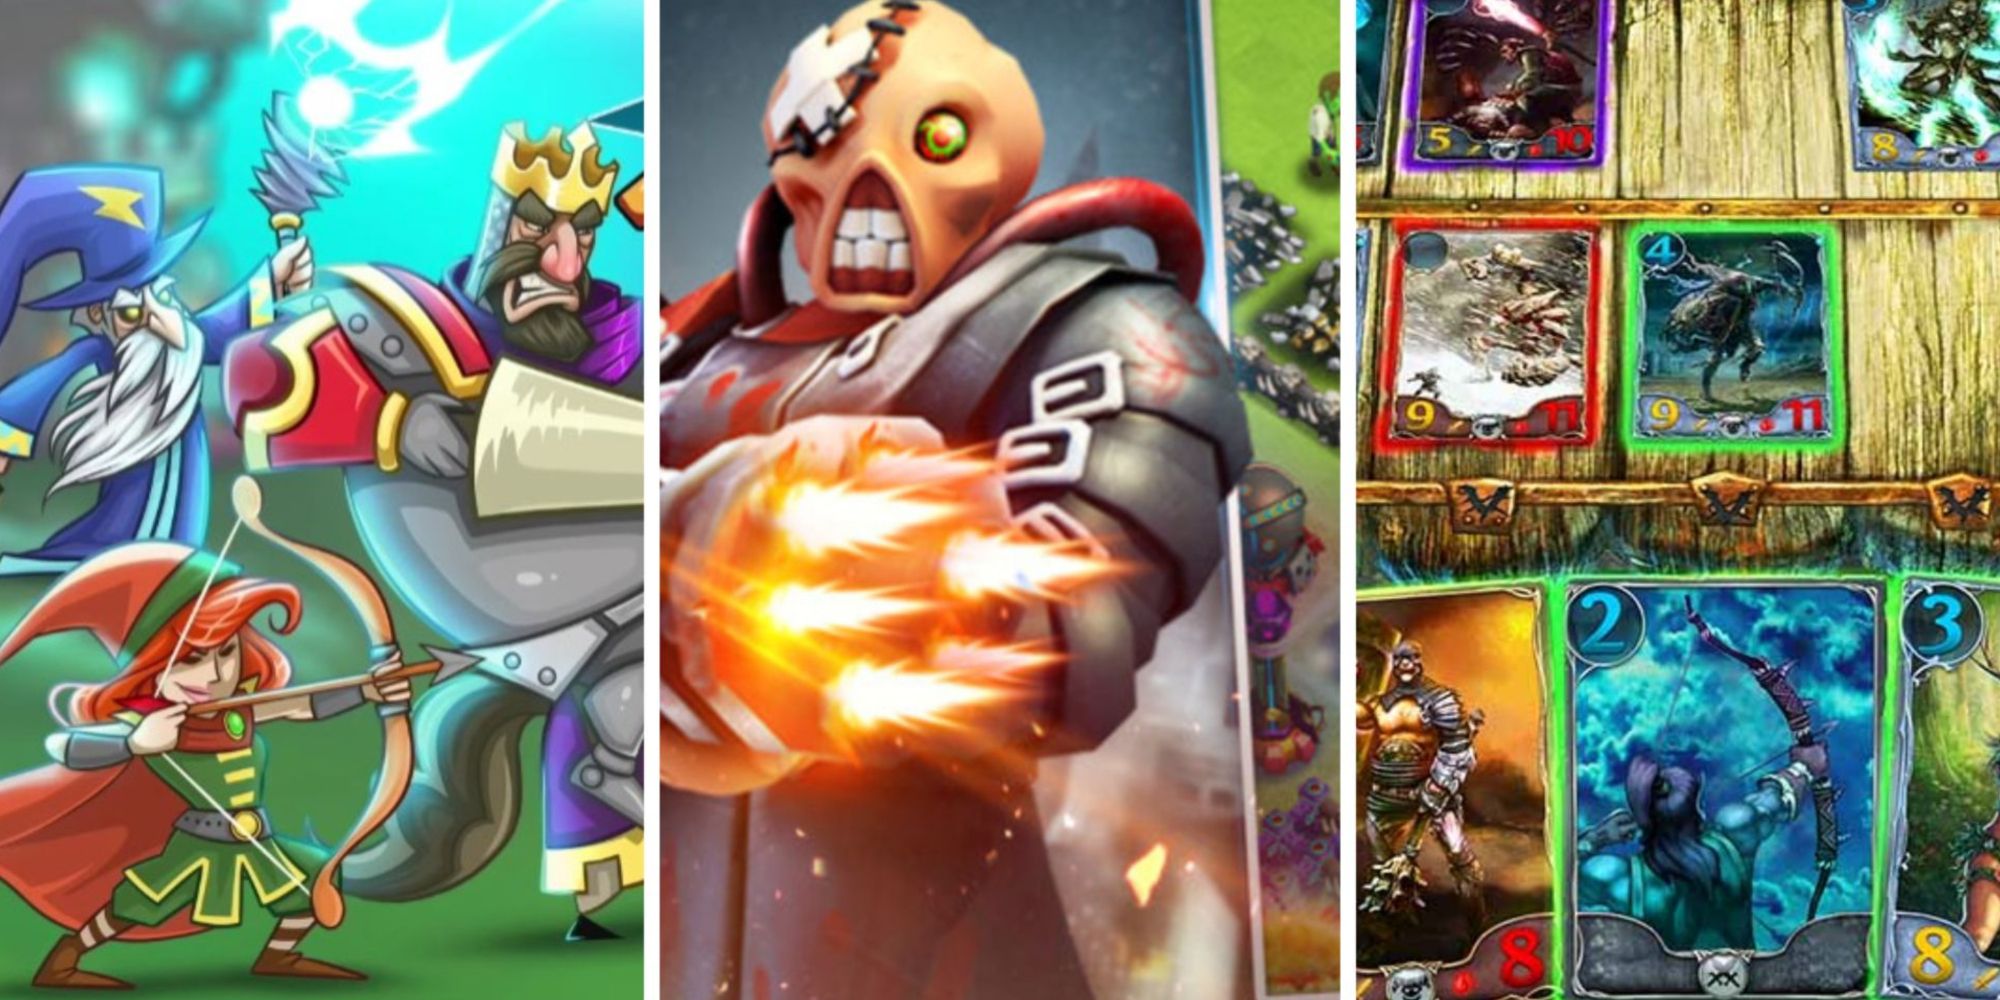 10 games like Clash Royale that you should download right now